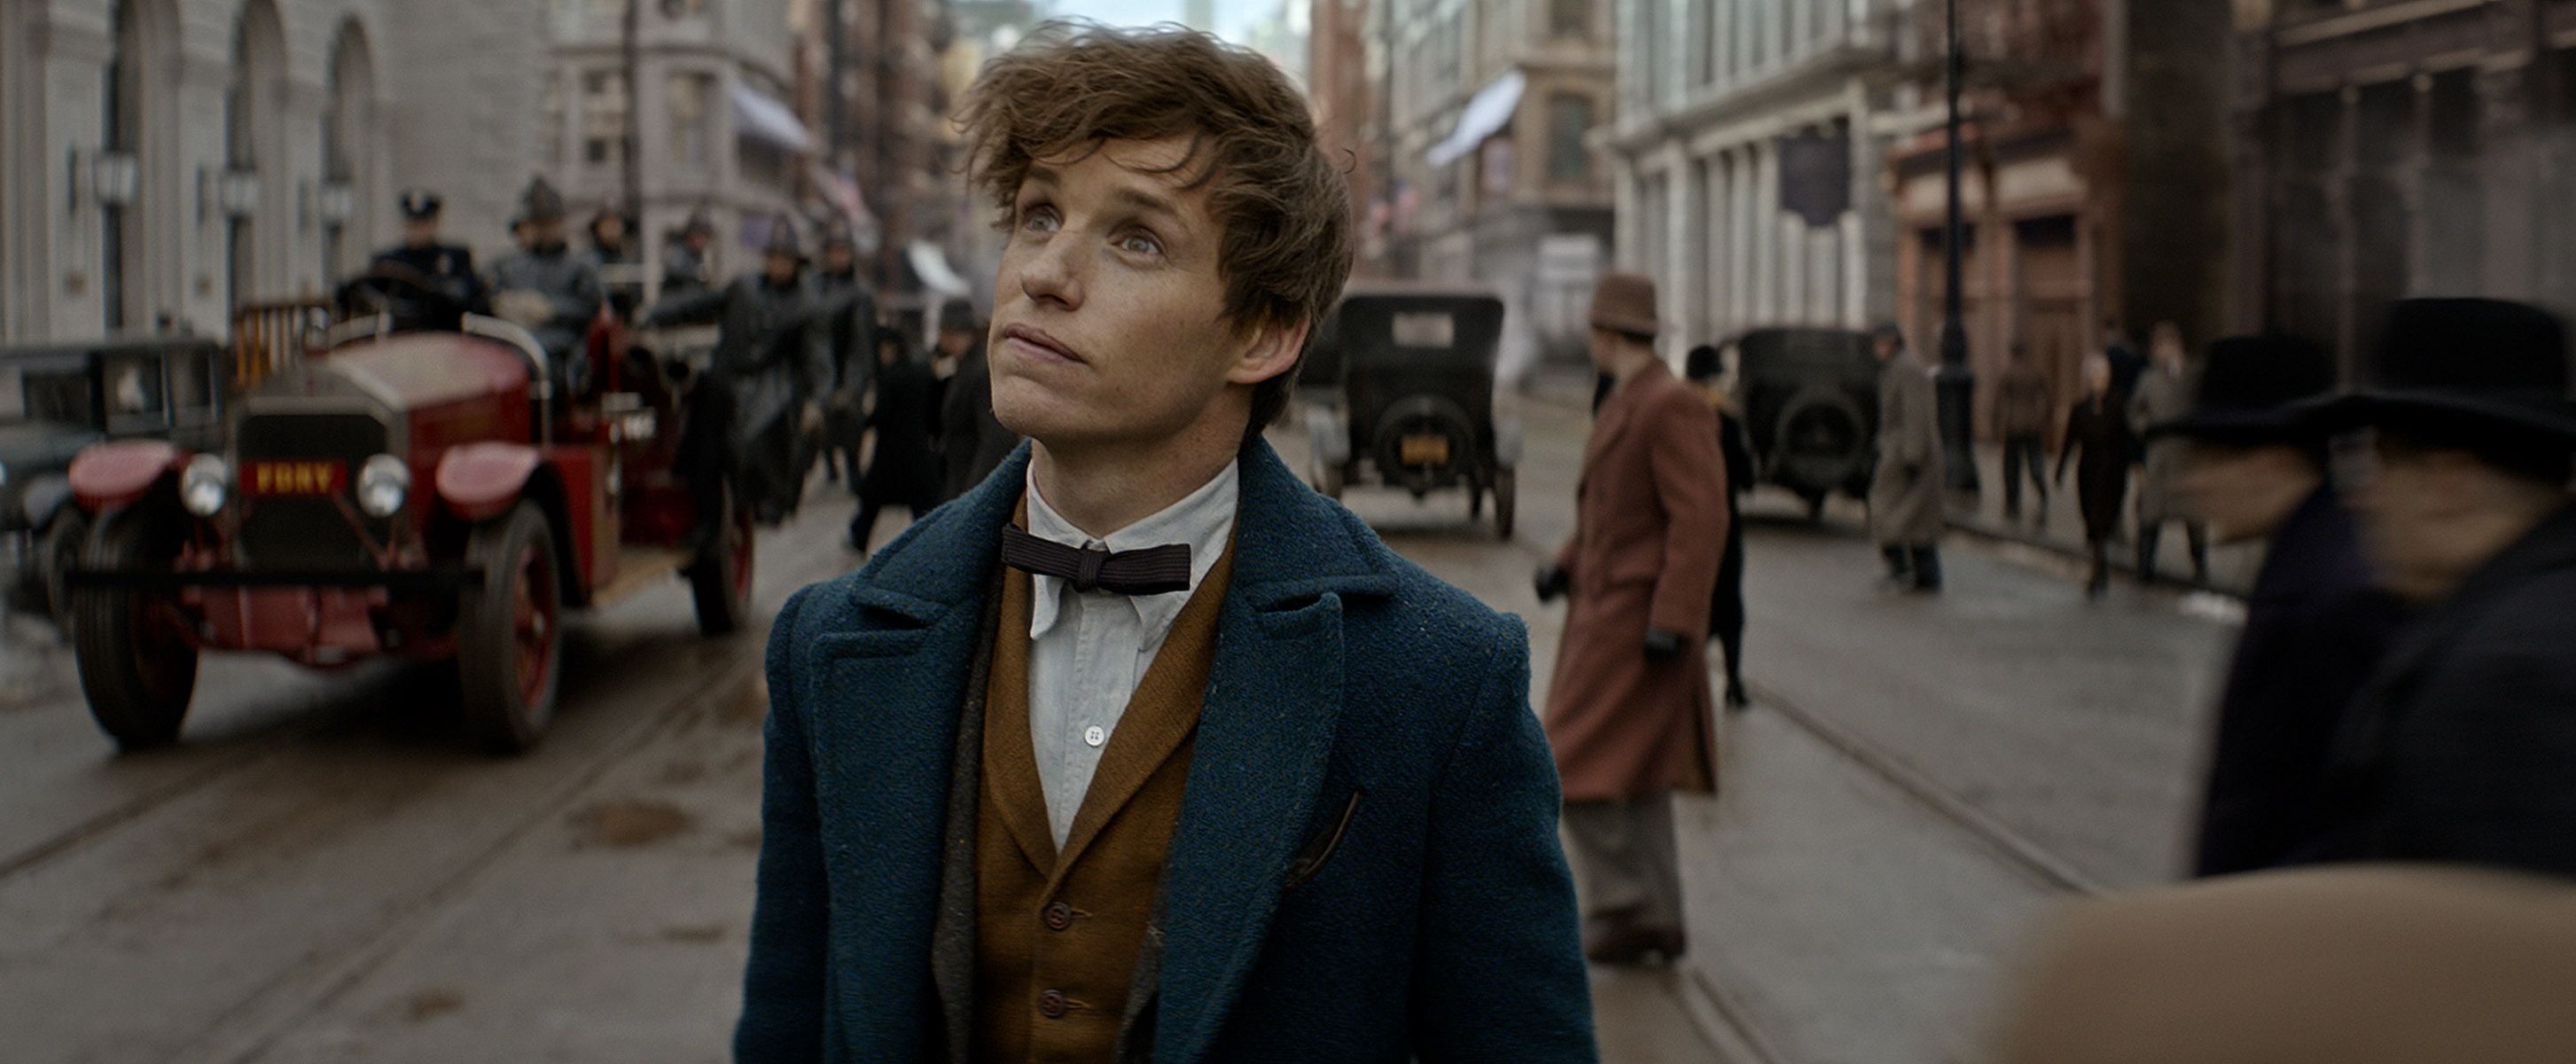 fantastic-beasts-and-where-to-find-them-eddie-redmayne